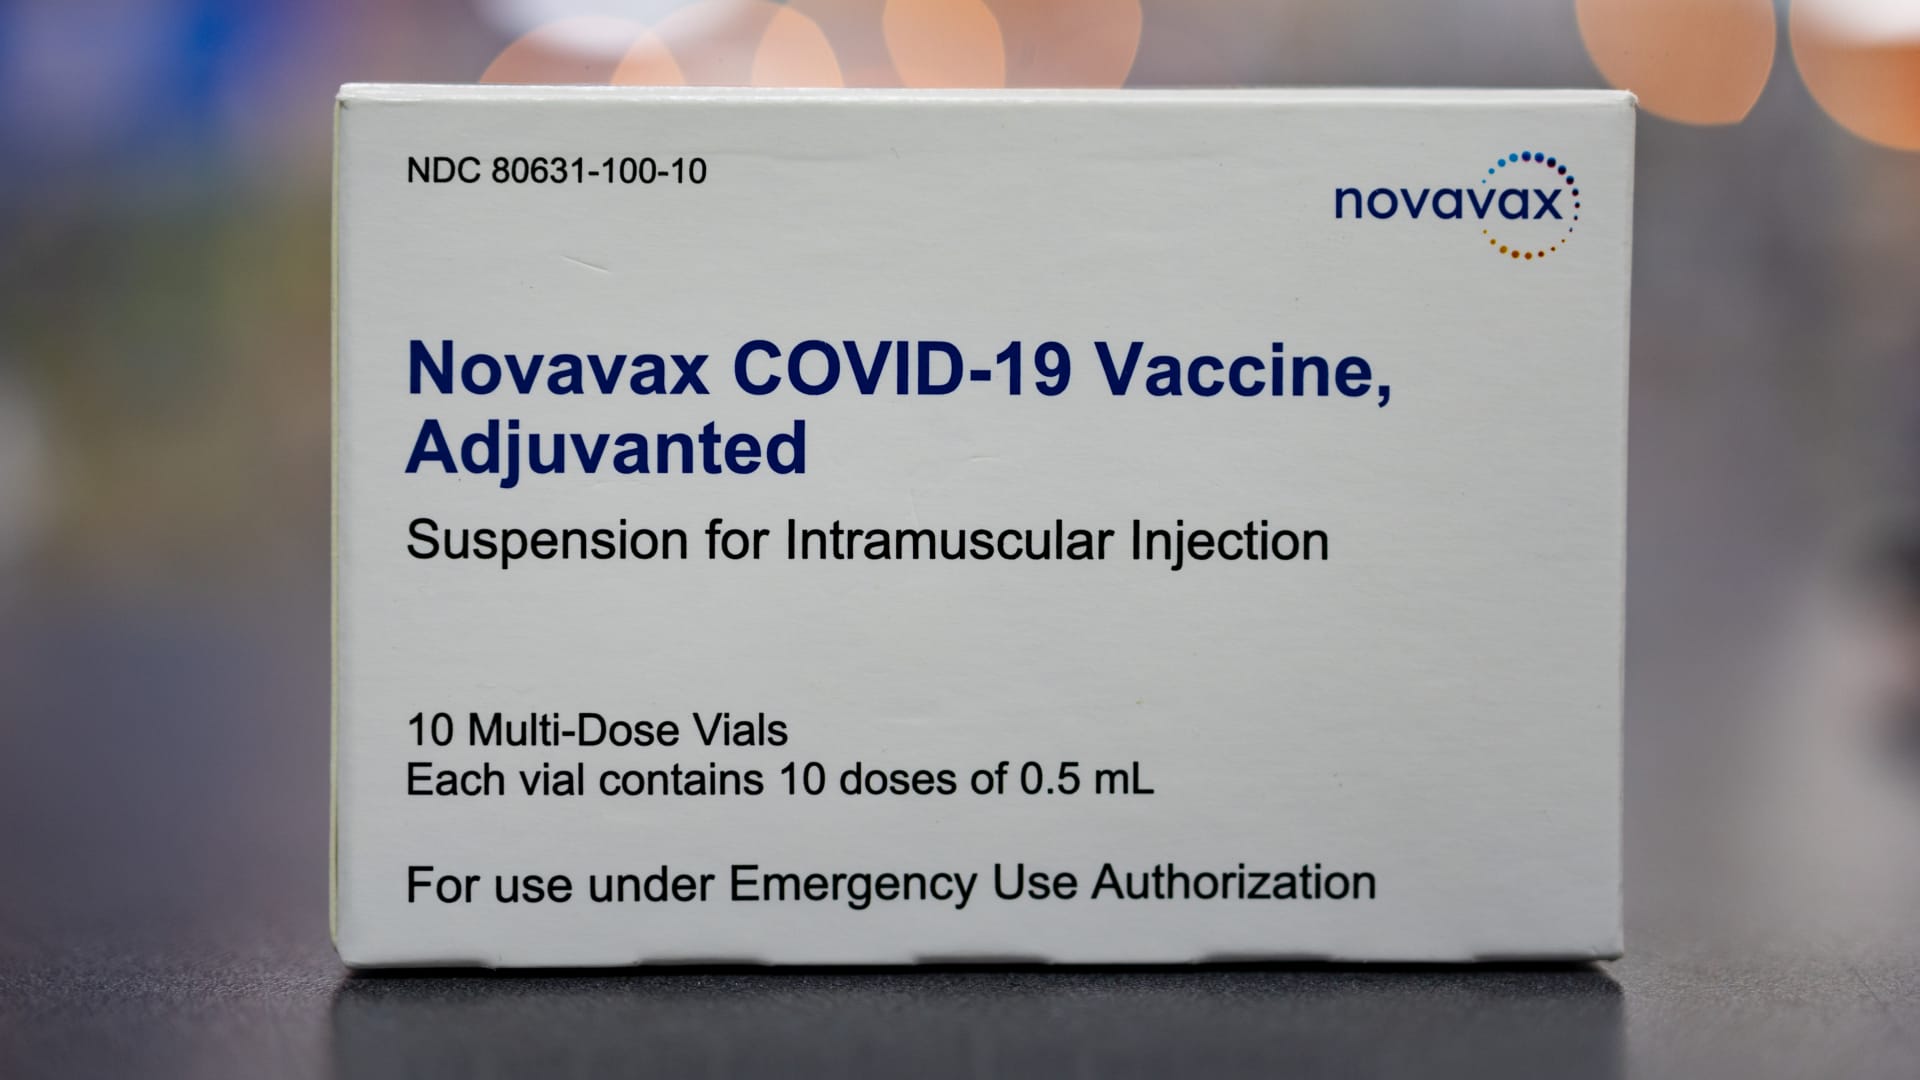 FDA authorizes emergency use for Novavax Covid-19 vaccine for ages 12 and 17